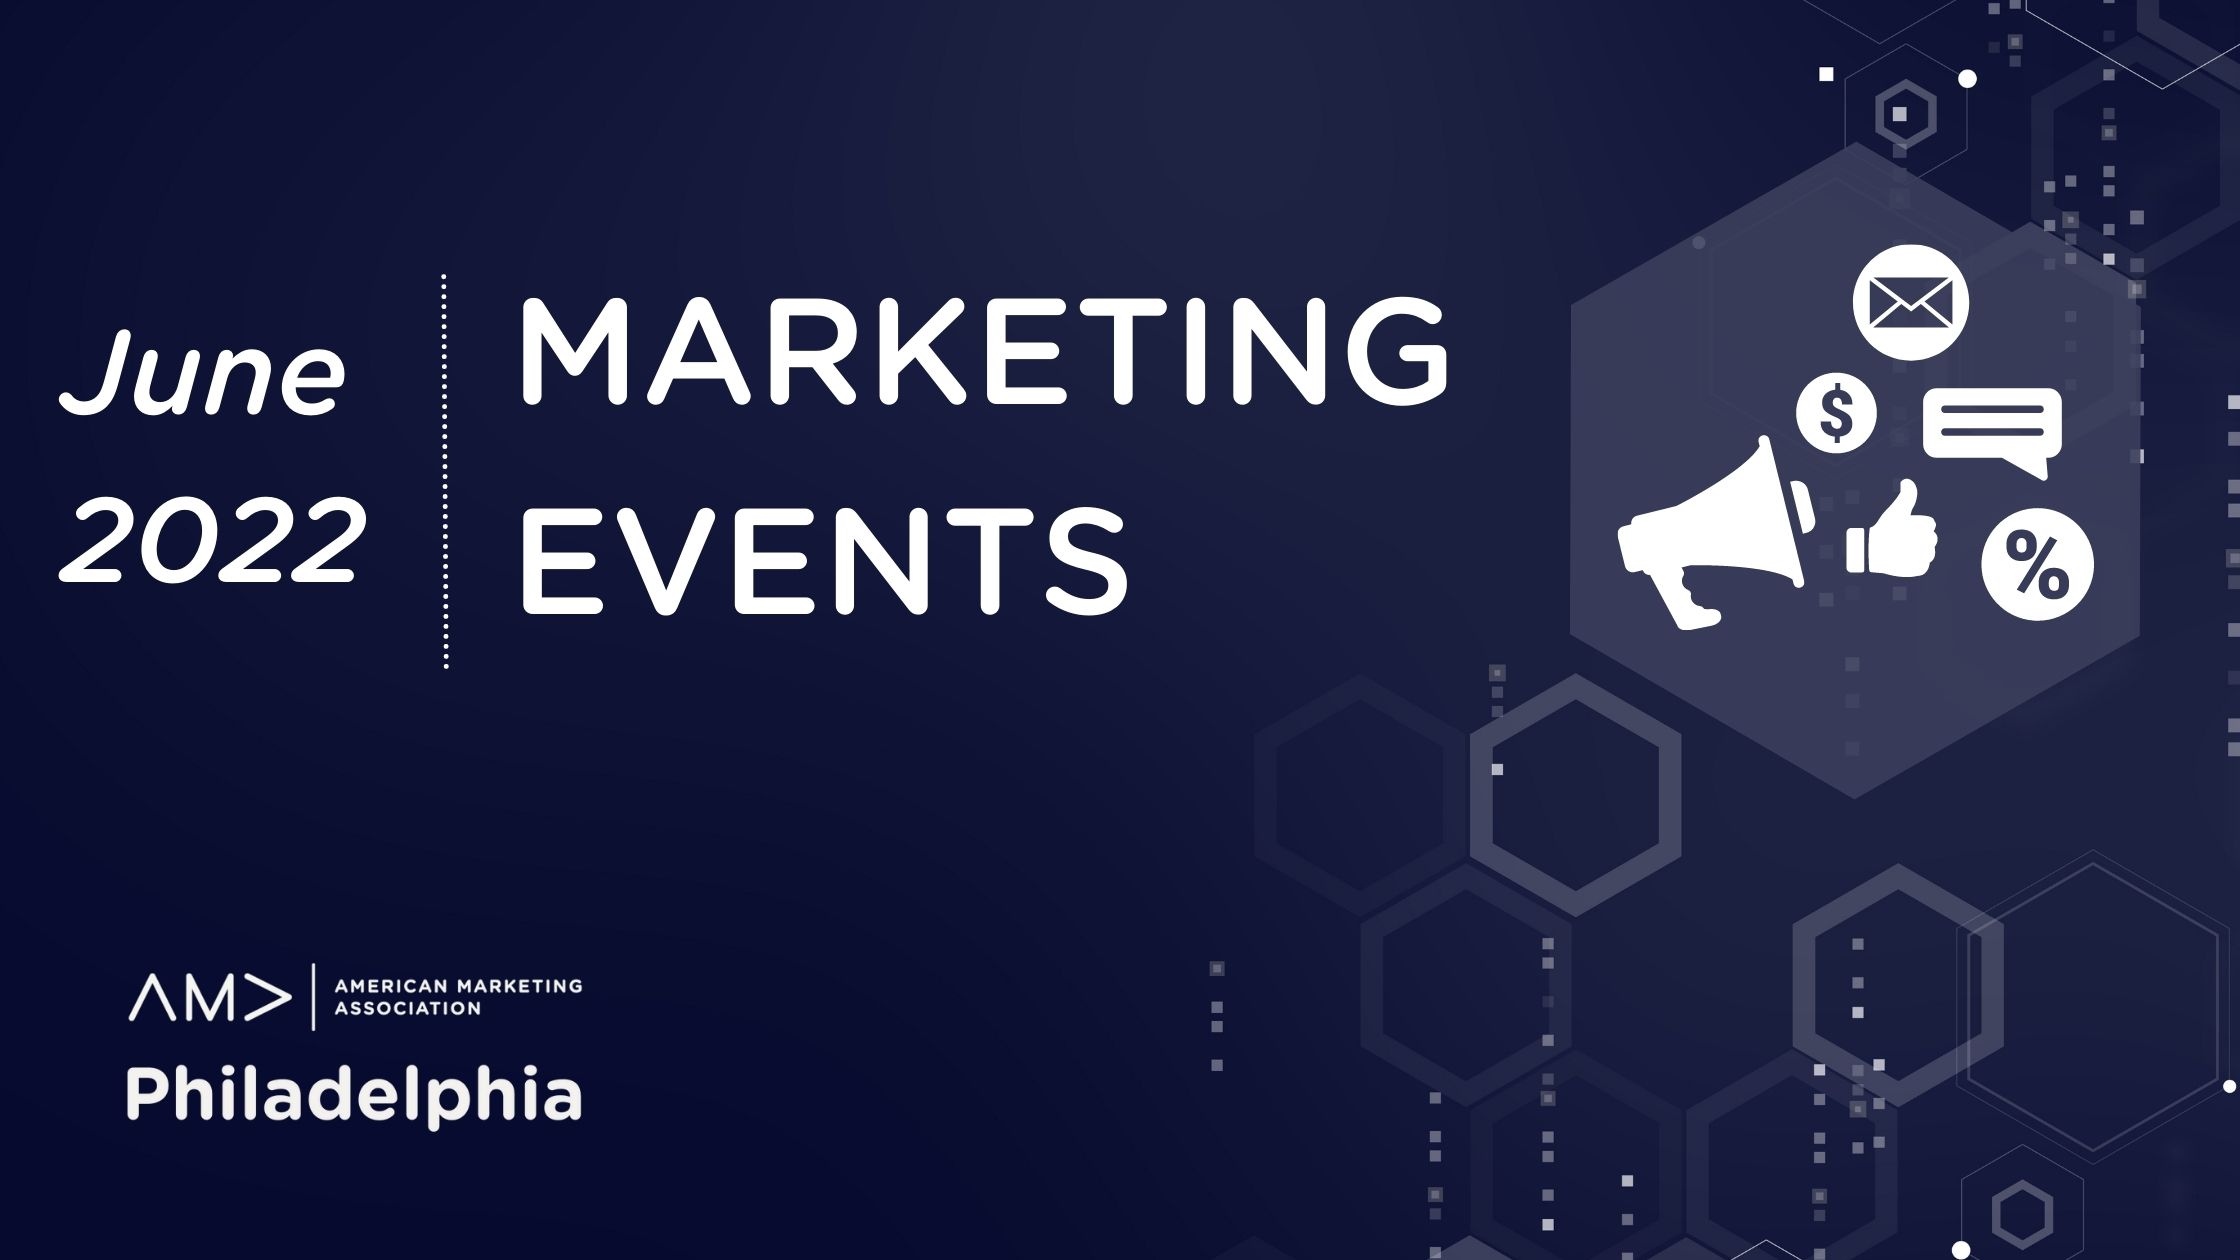 3 Marketing Events Not To Miss This Month